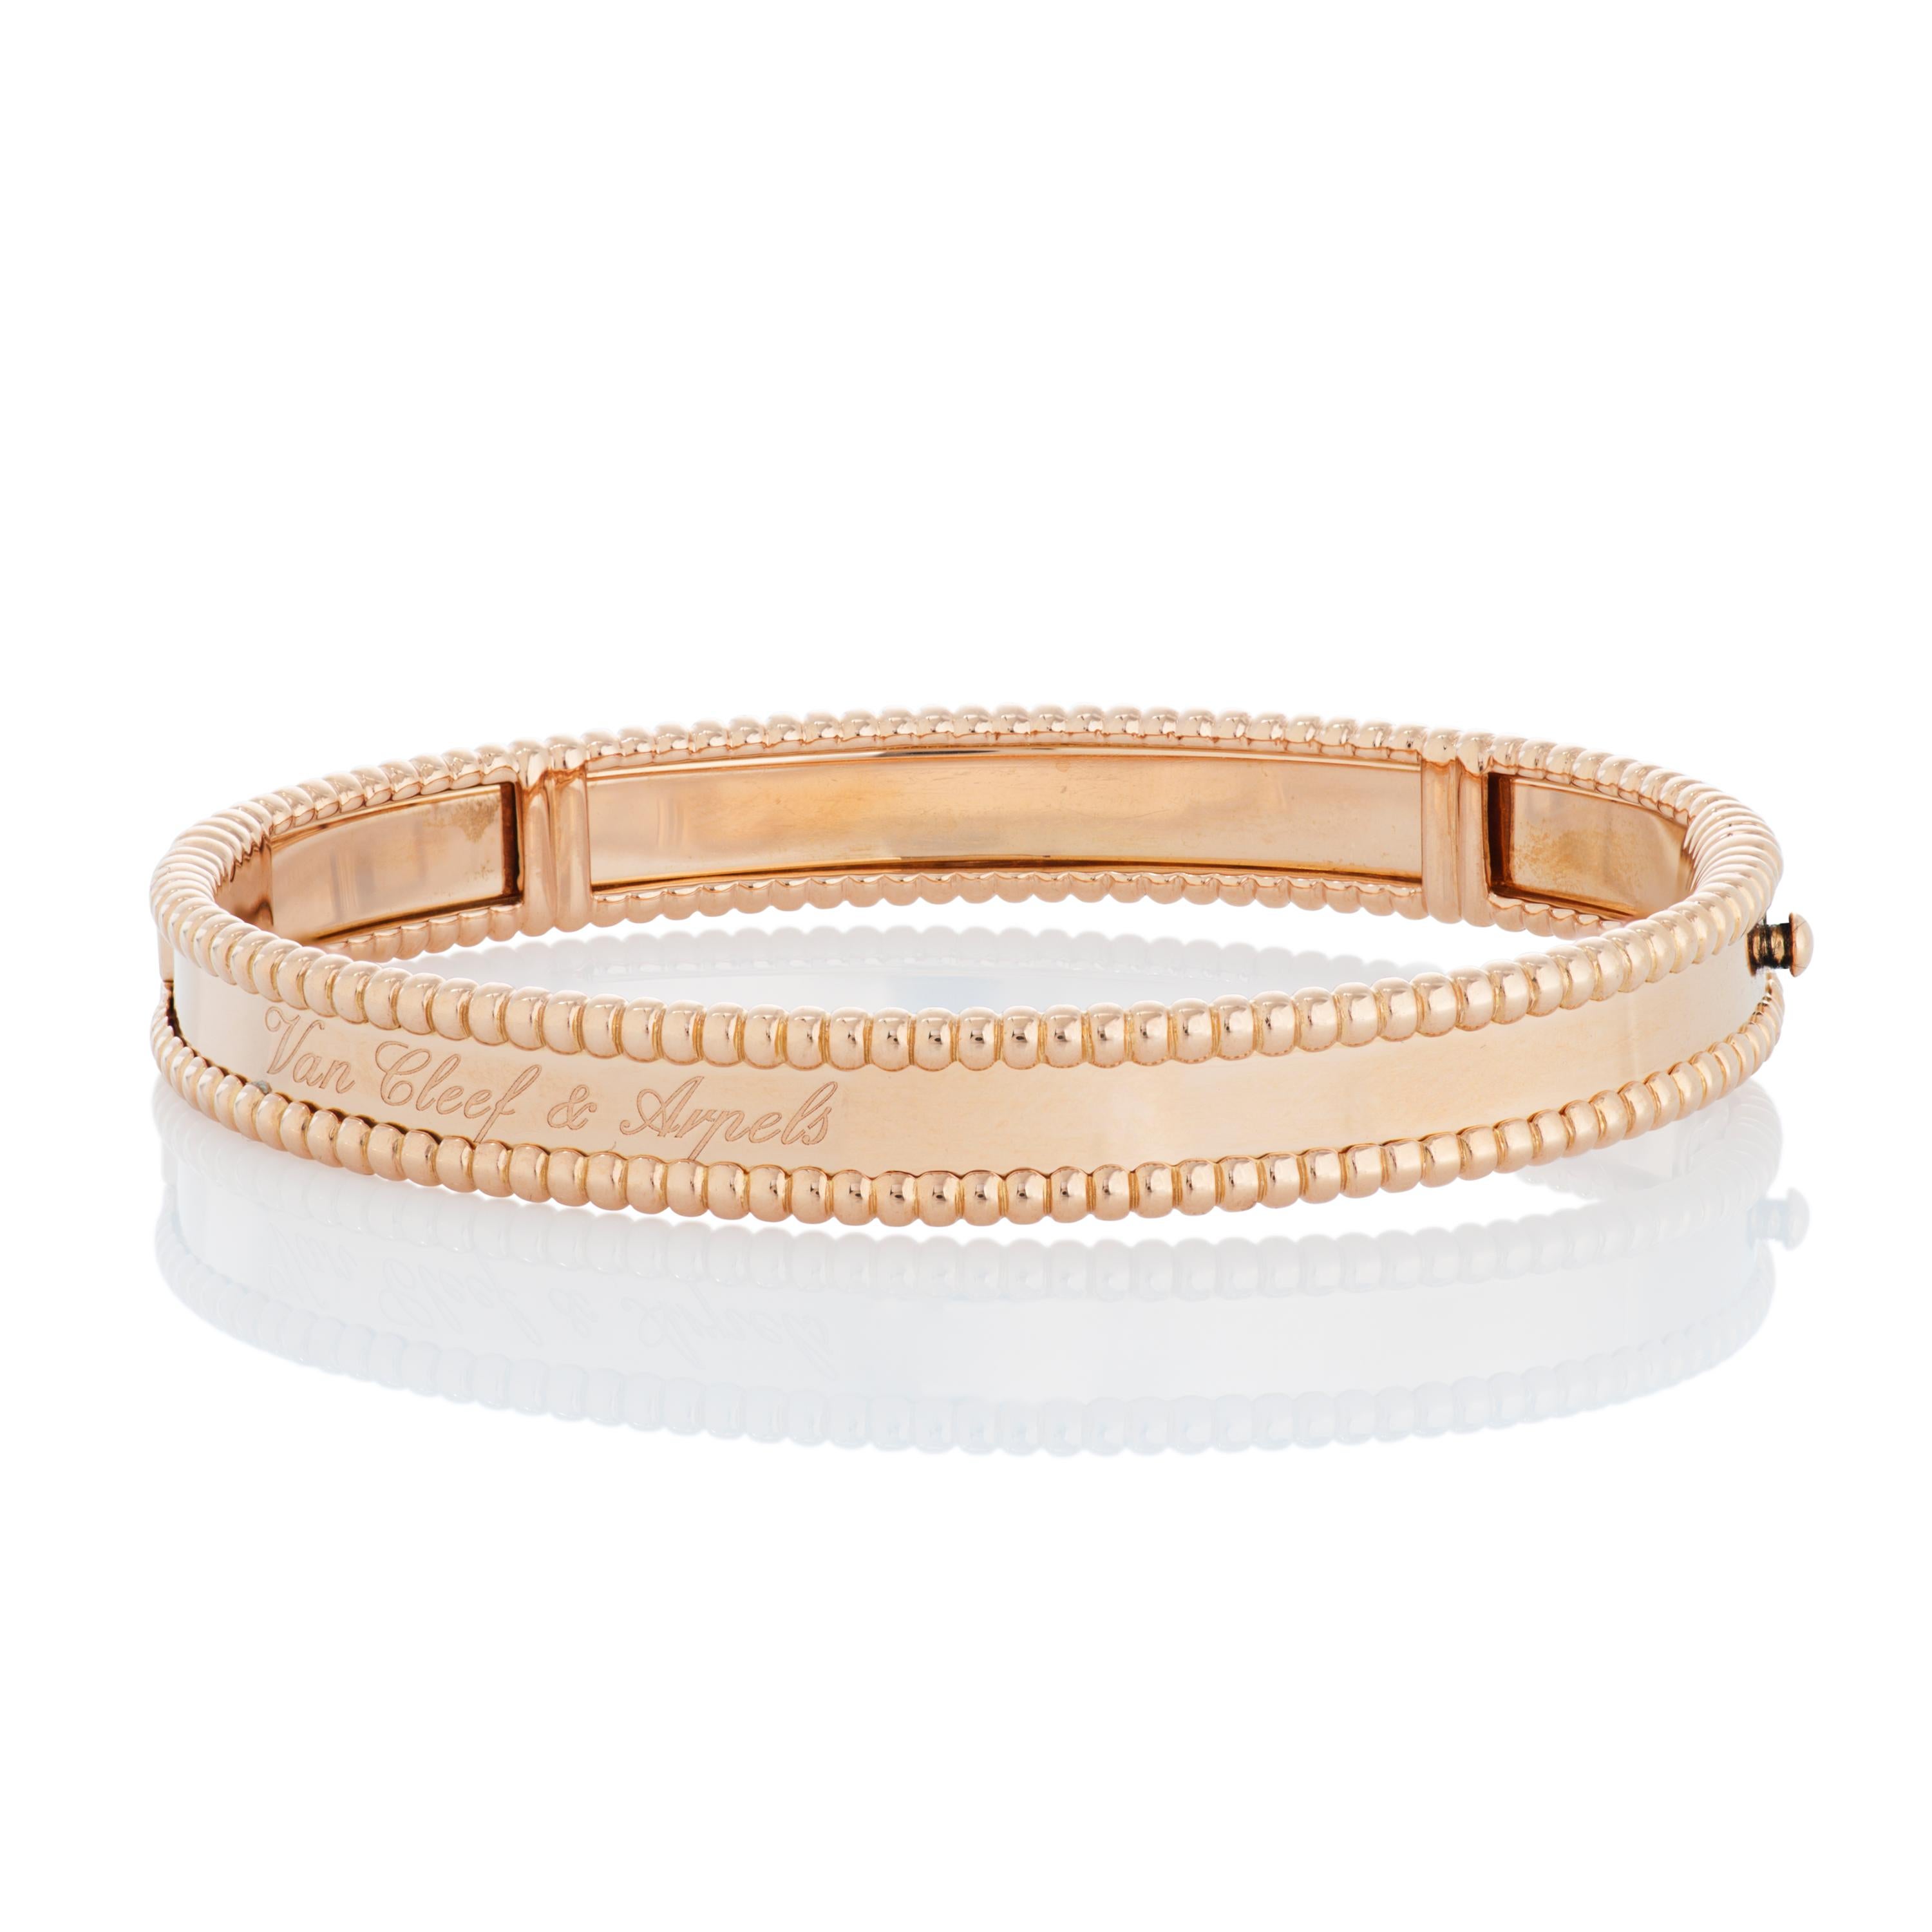 Van Cleef & Arpels Perlee signature bangle bracelet in 18k rose gold, accompanied by VCA box and VCA certificate of authenticity. 

This VCA bangle features 